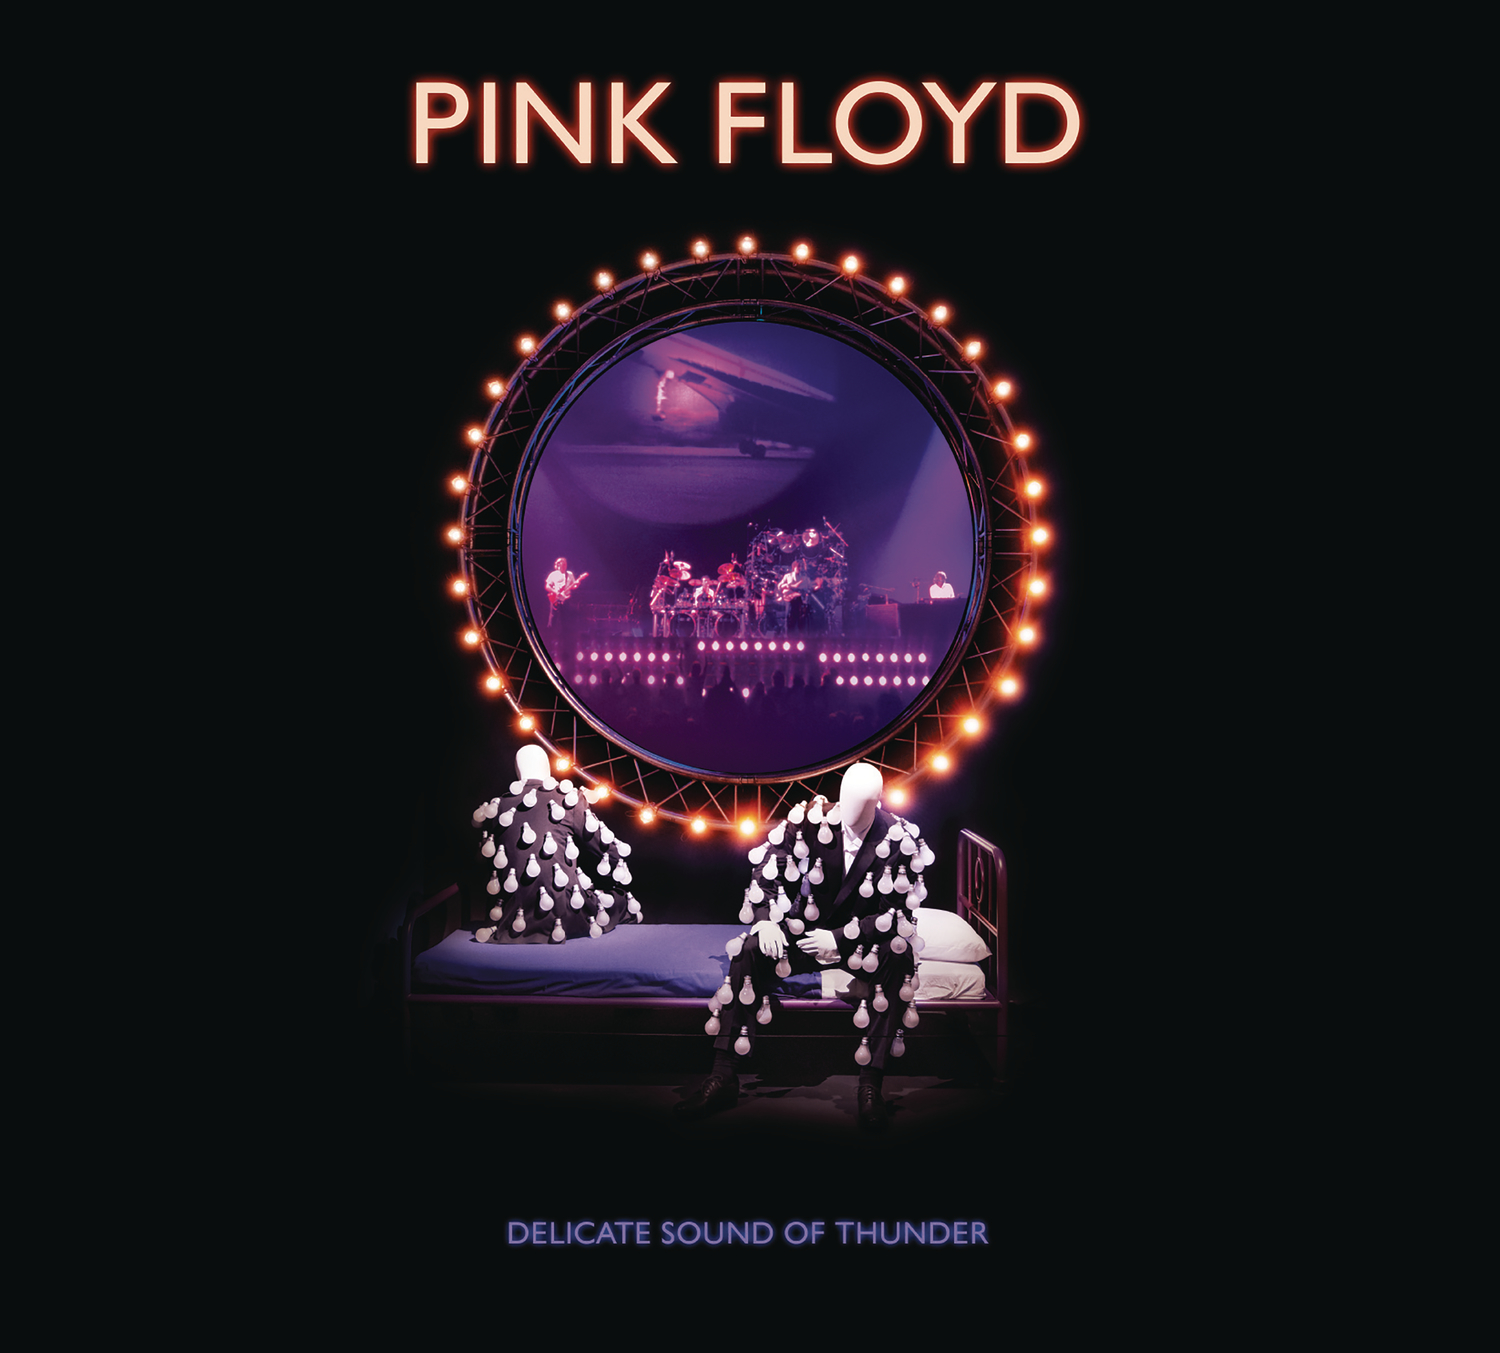 Delicate Sound of Thunder -  Pink Floyd